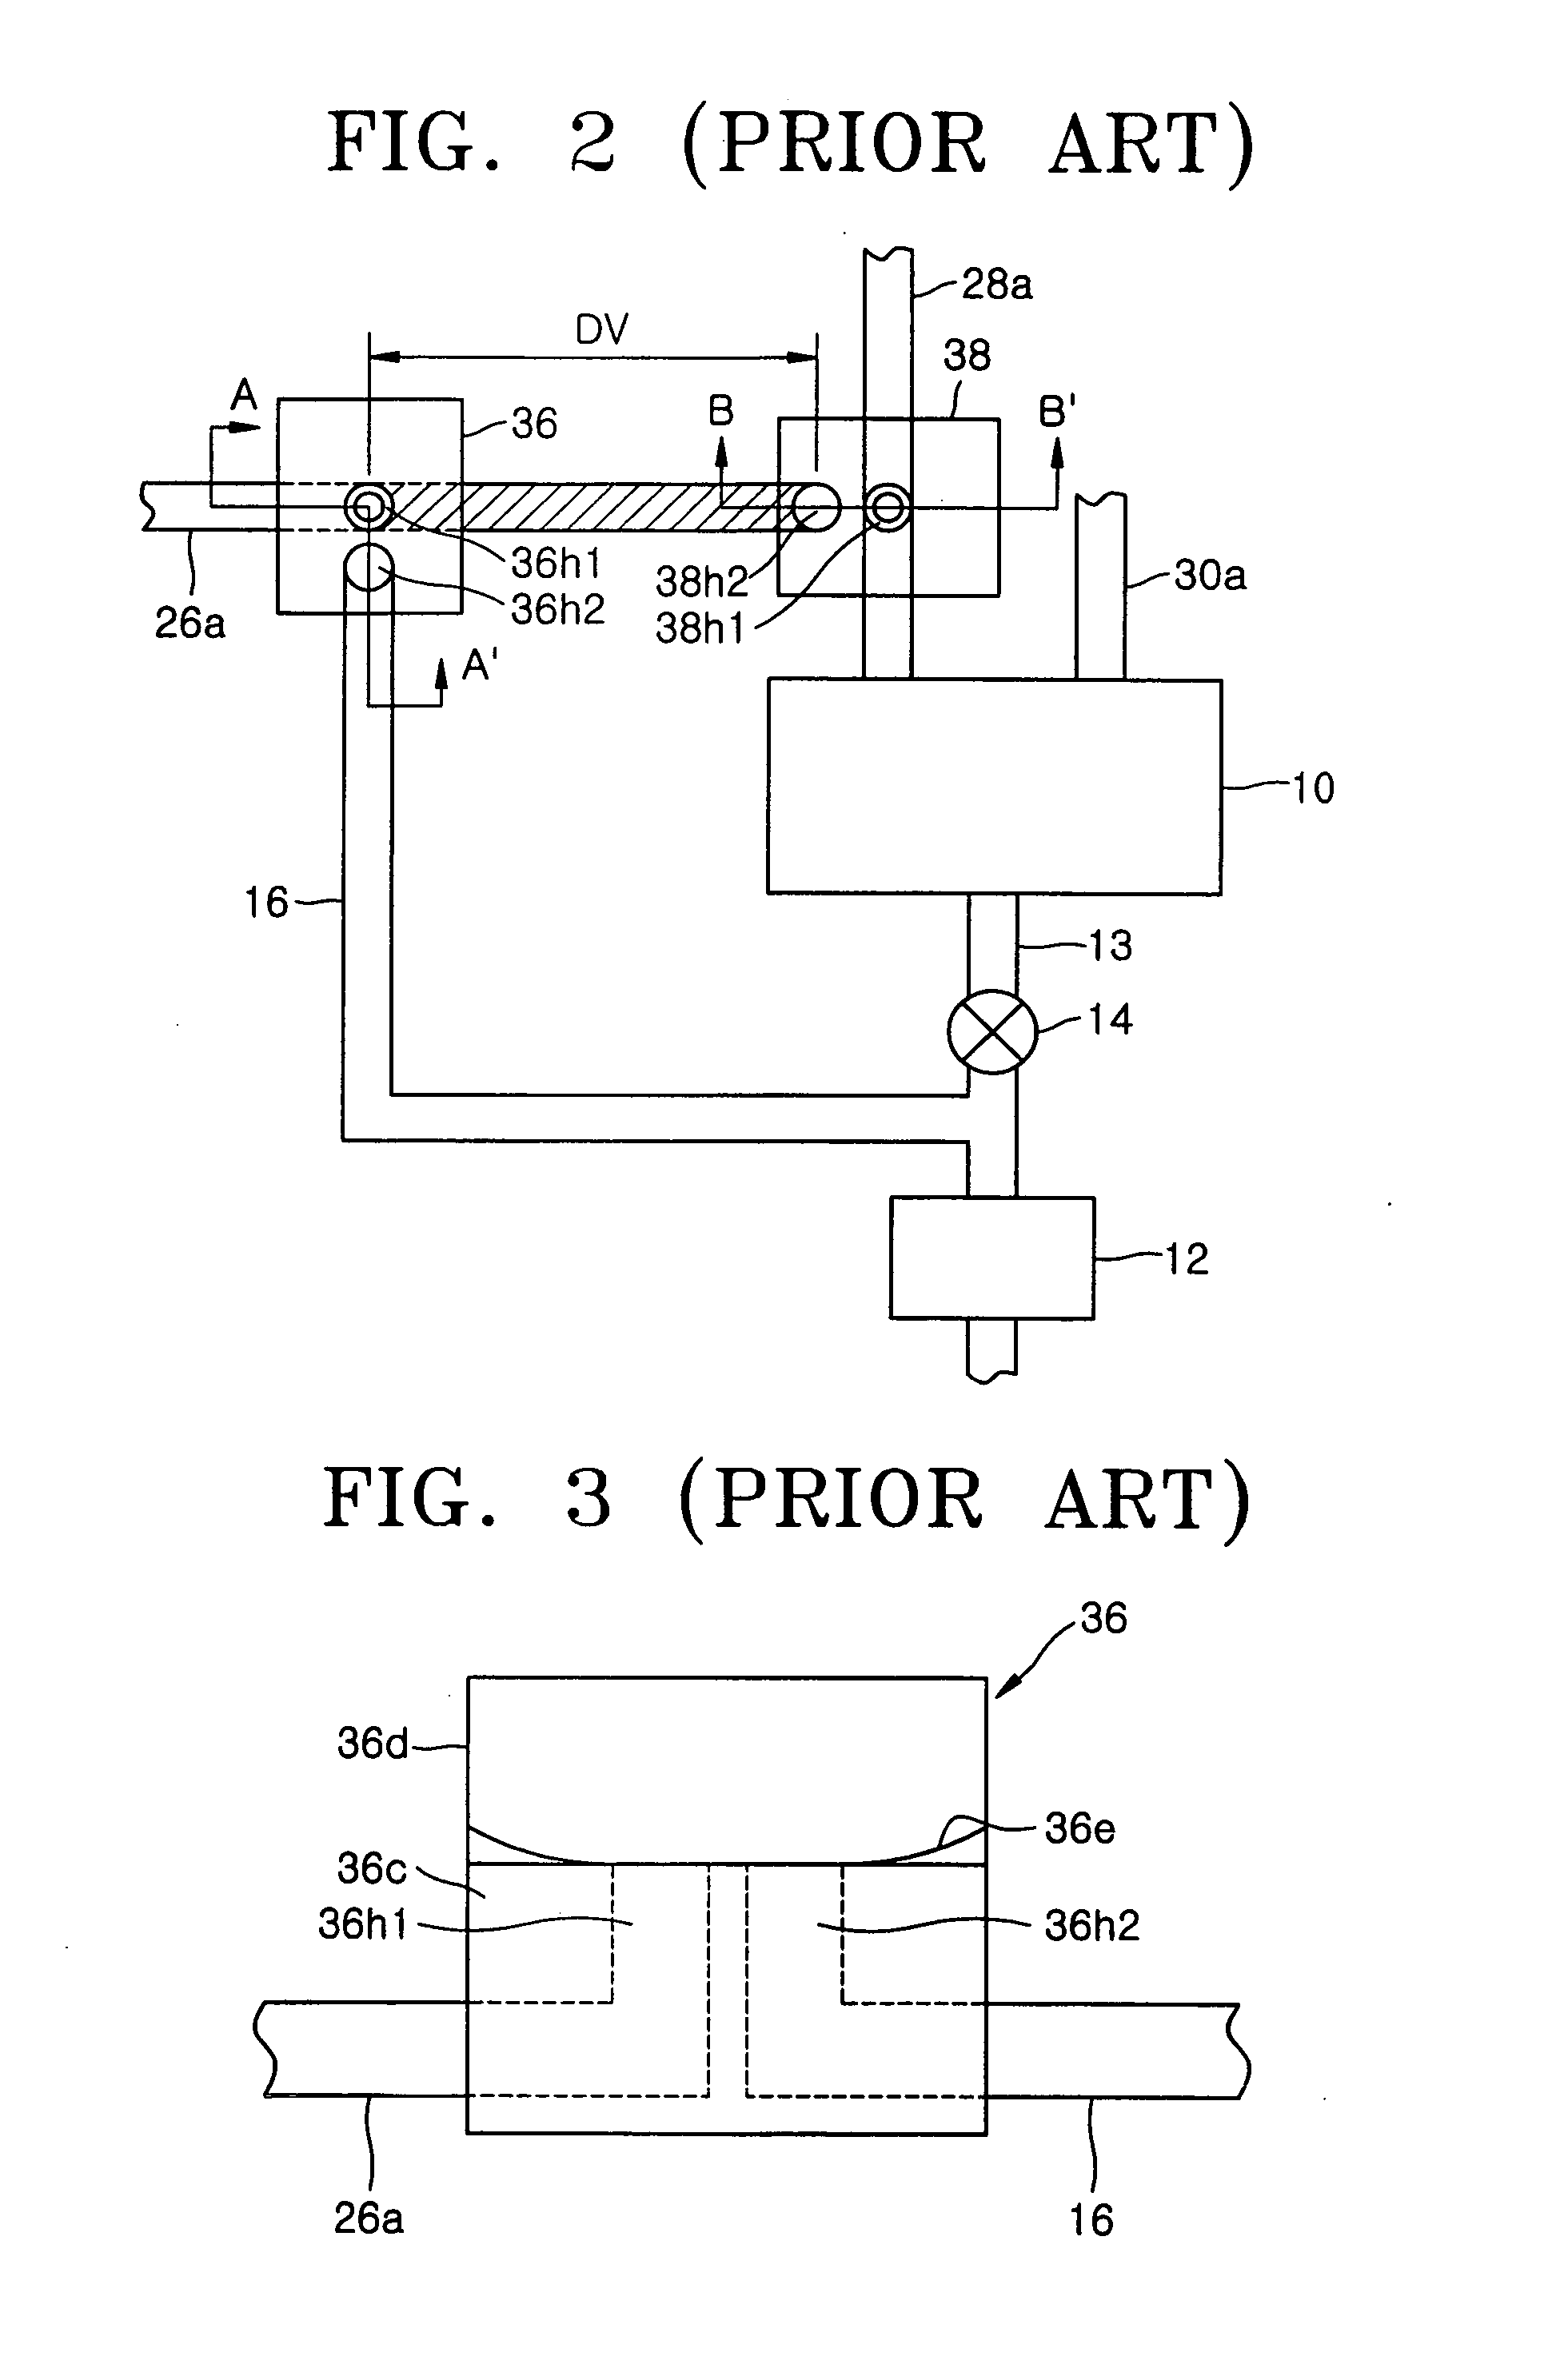 Apparatus including 4-way valve for fabricating semiconductor device, method of controlling valve, and method of fabricating semiconductor device using the apparatus